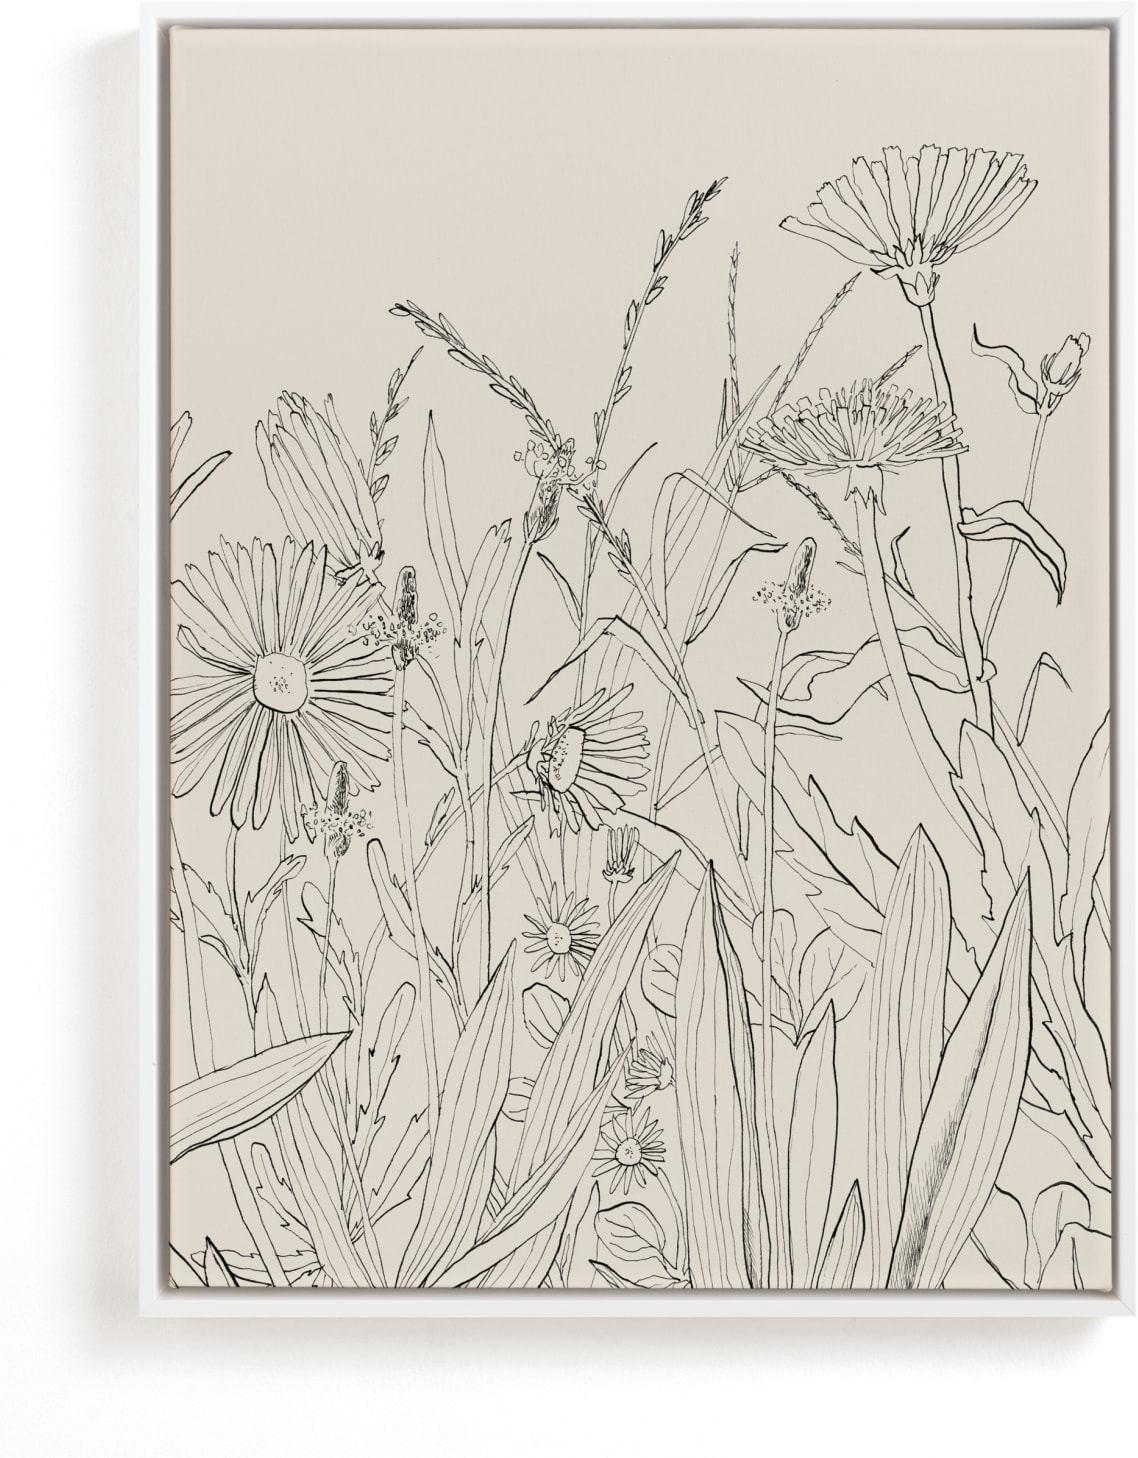 This is a ivory art by Catilustre called Field of wild flowers II.